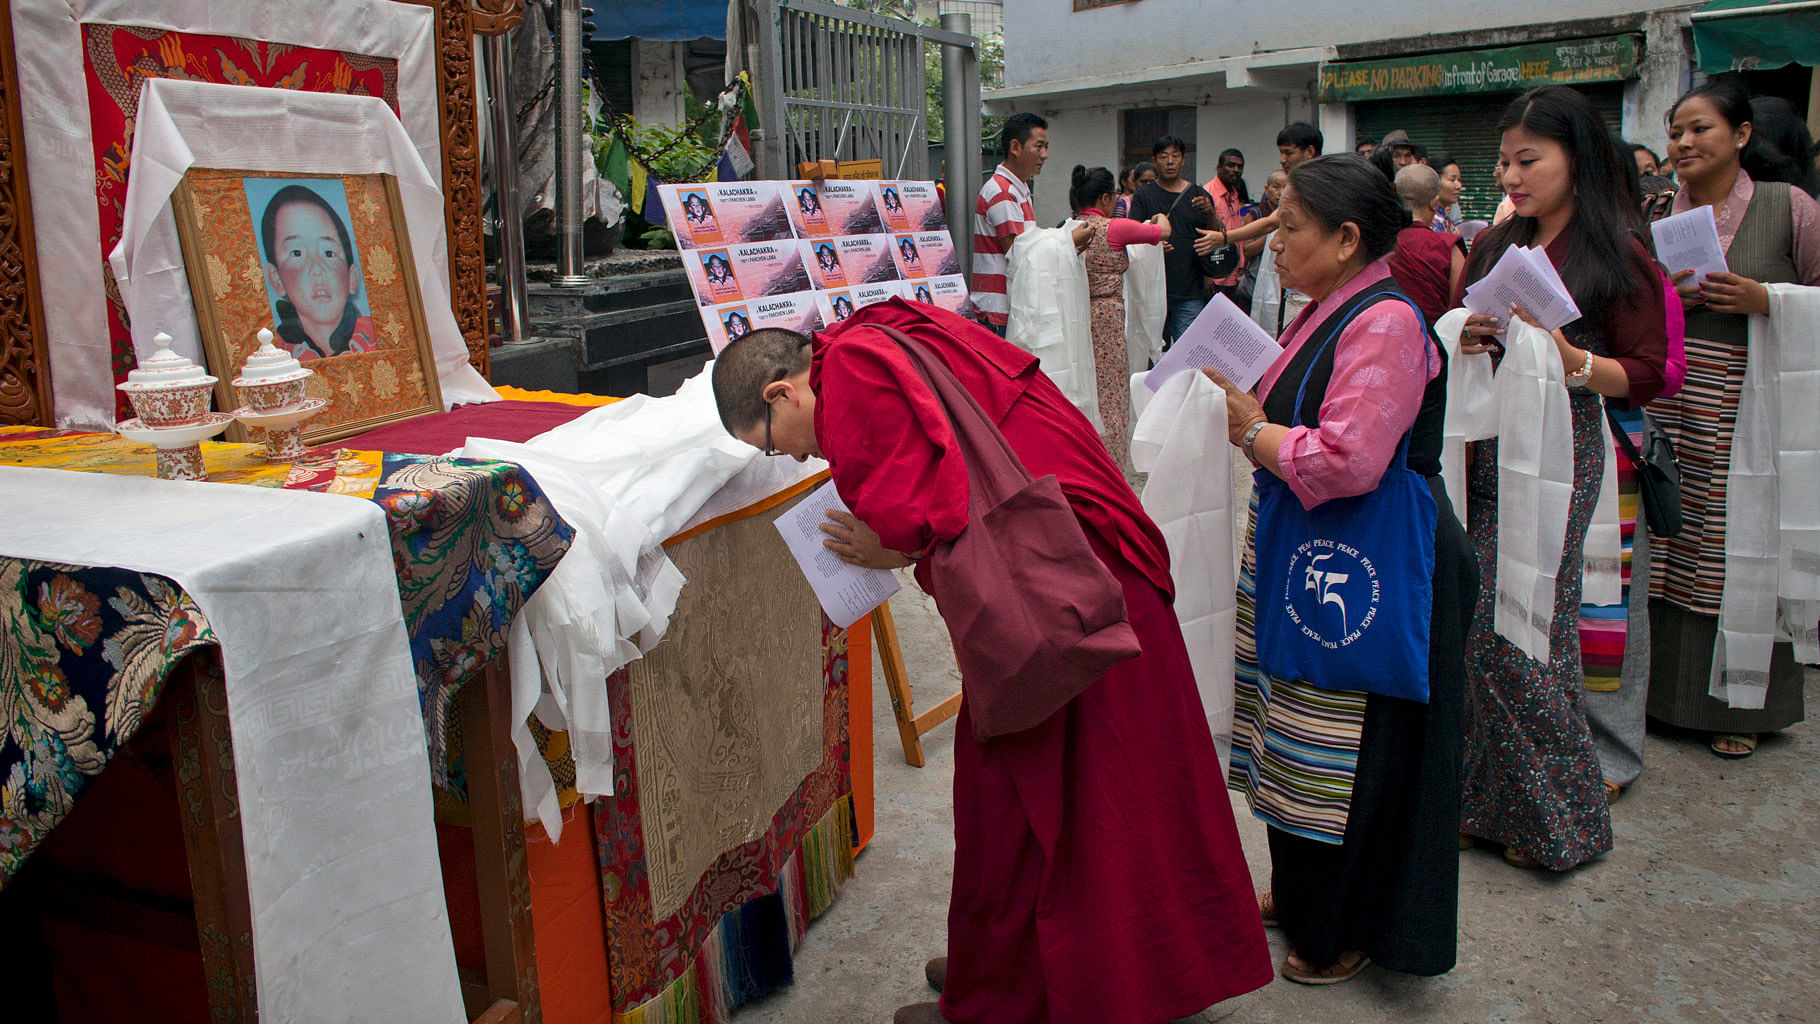 

Exiled Tibetans carry ceremonial scarves to offer them in front of a portrait of Tibetan spiritual leader, the 11th Panchen Lama in Dharmsala. (Photo: AP)